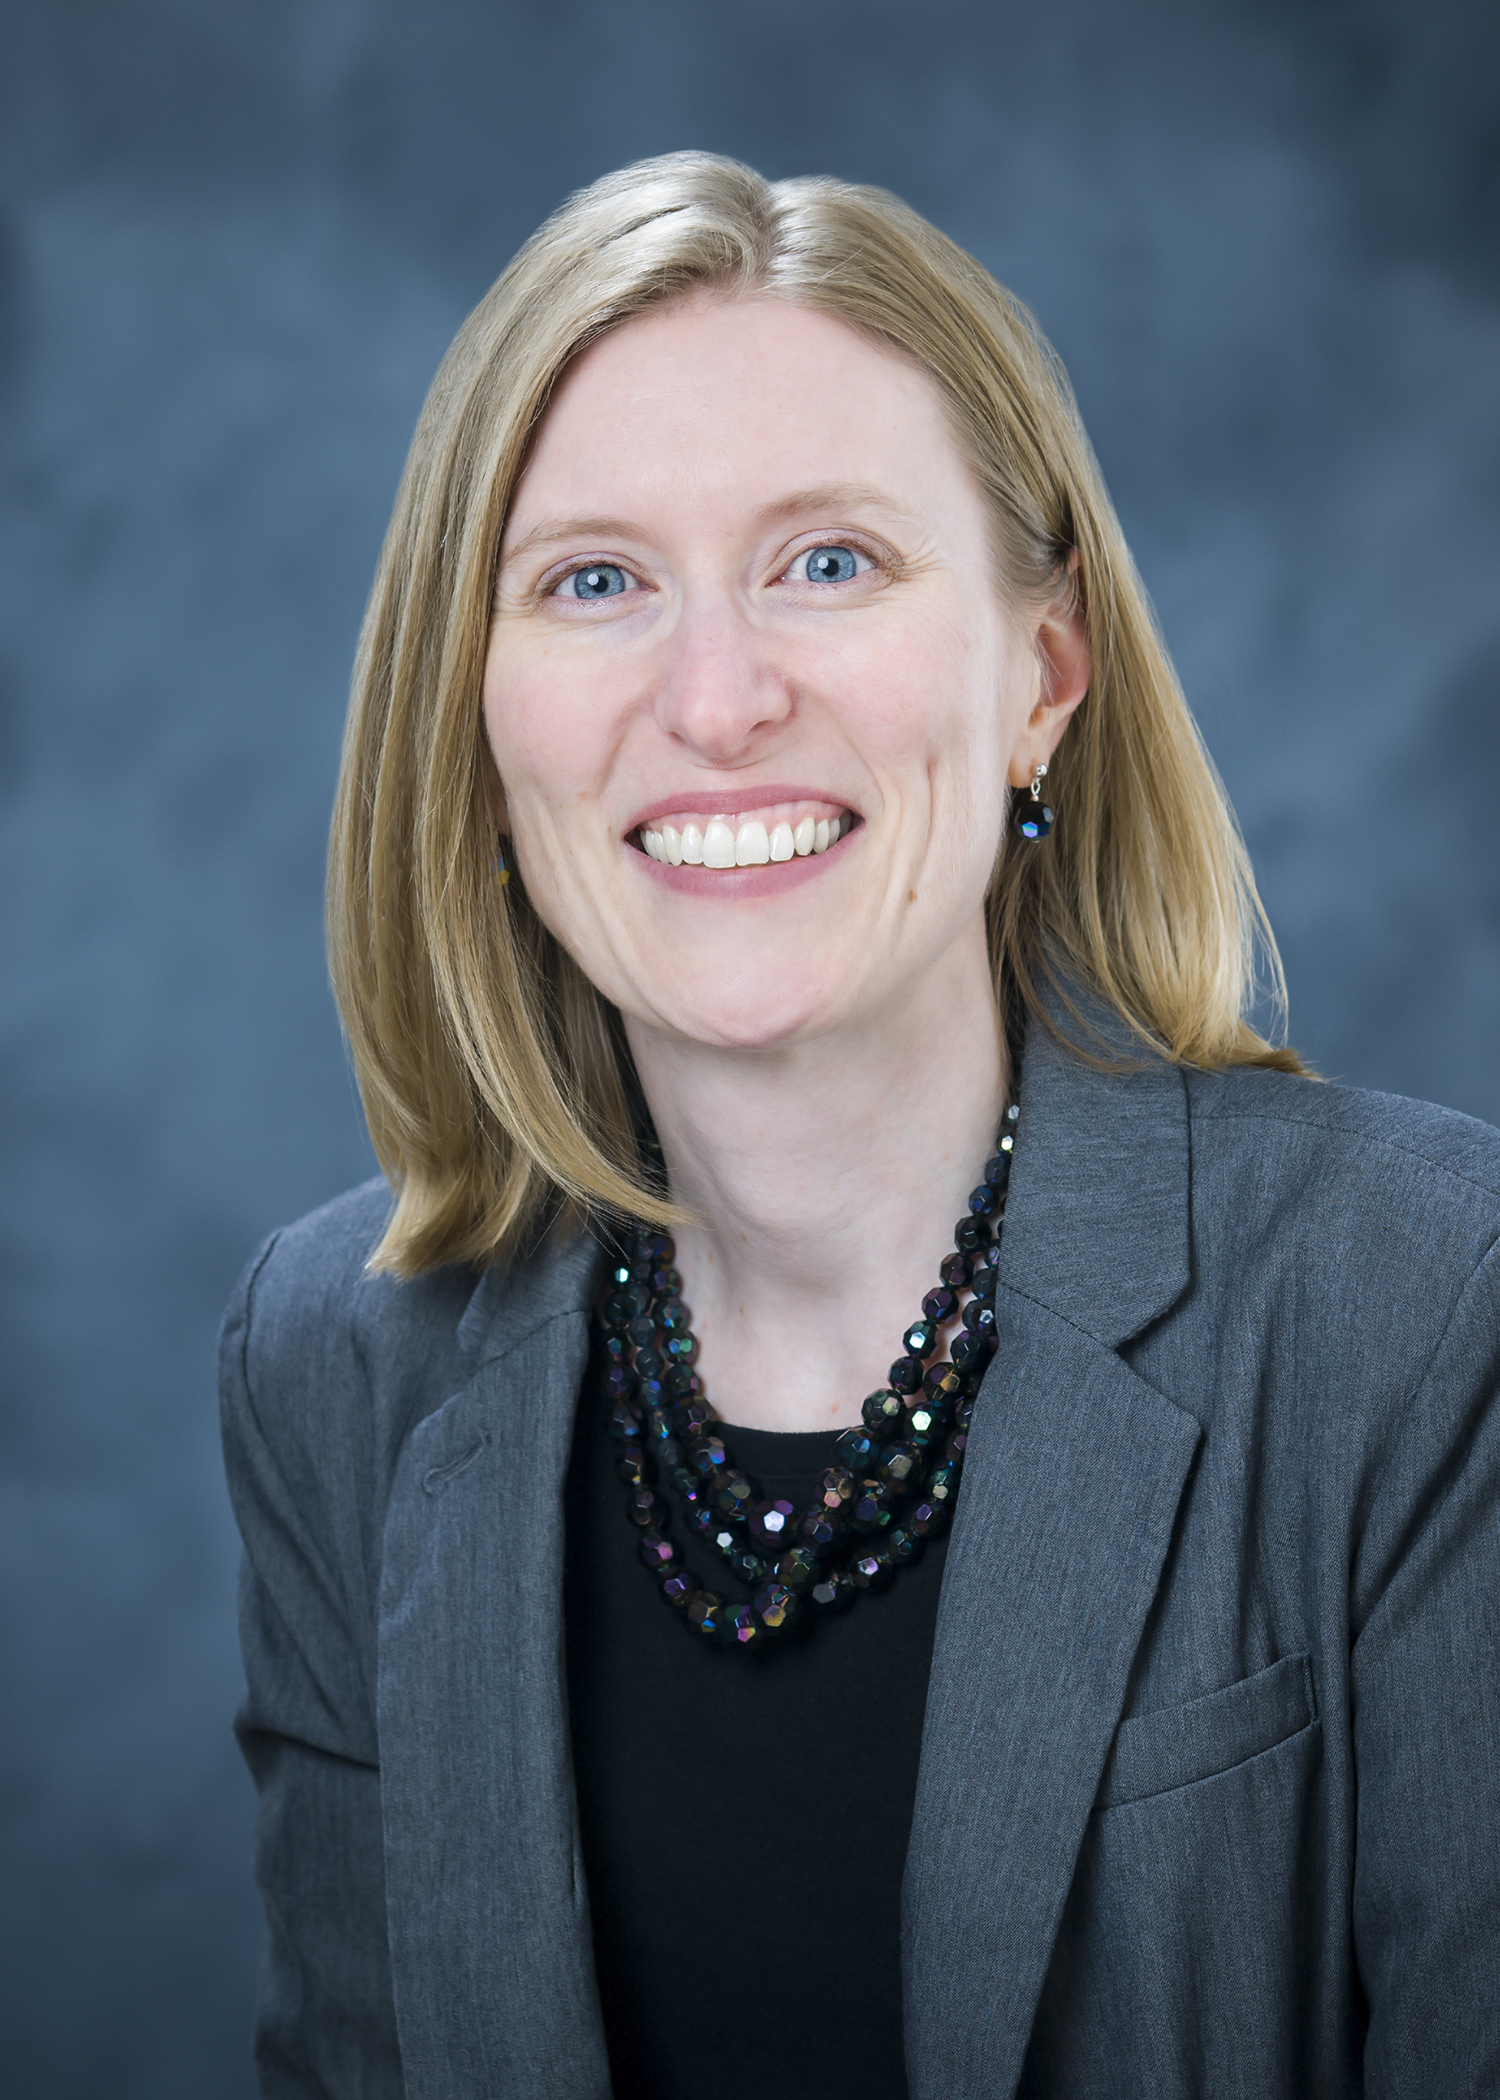 Professional photo of Kathy Sherman-Morris, wearing a black shirt and gray blazer against a blue background.